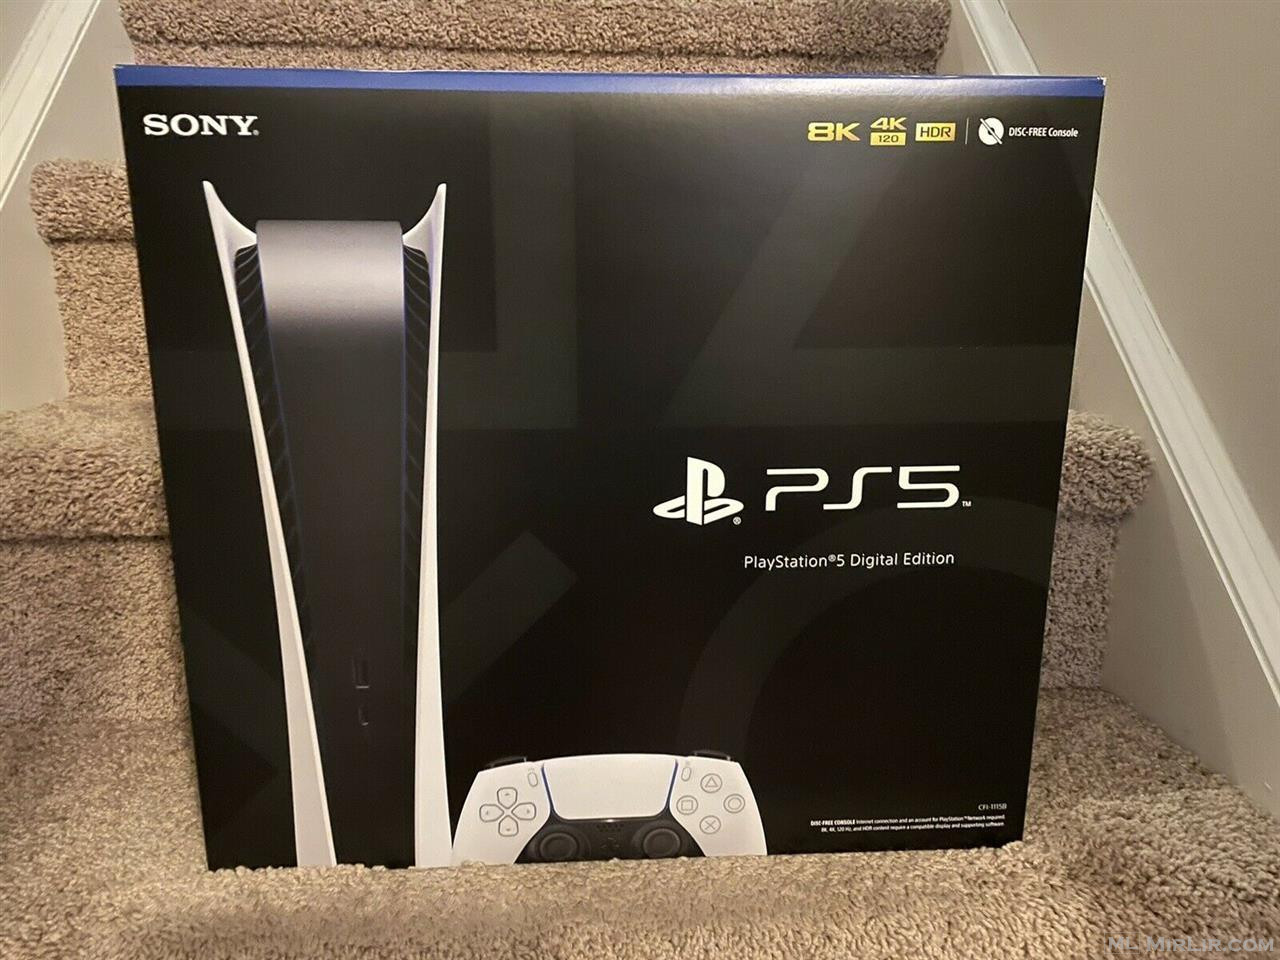   BRAND NEW Playstation PS 5 Disc Edition Console System